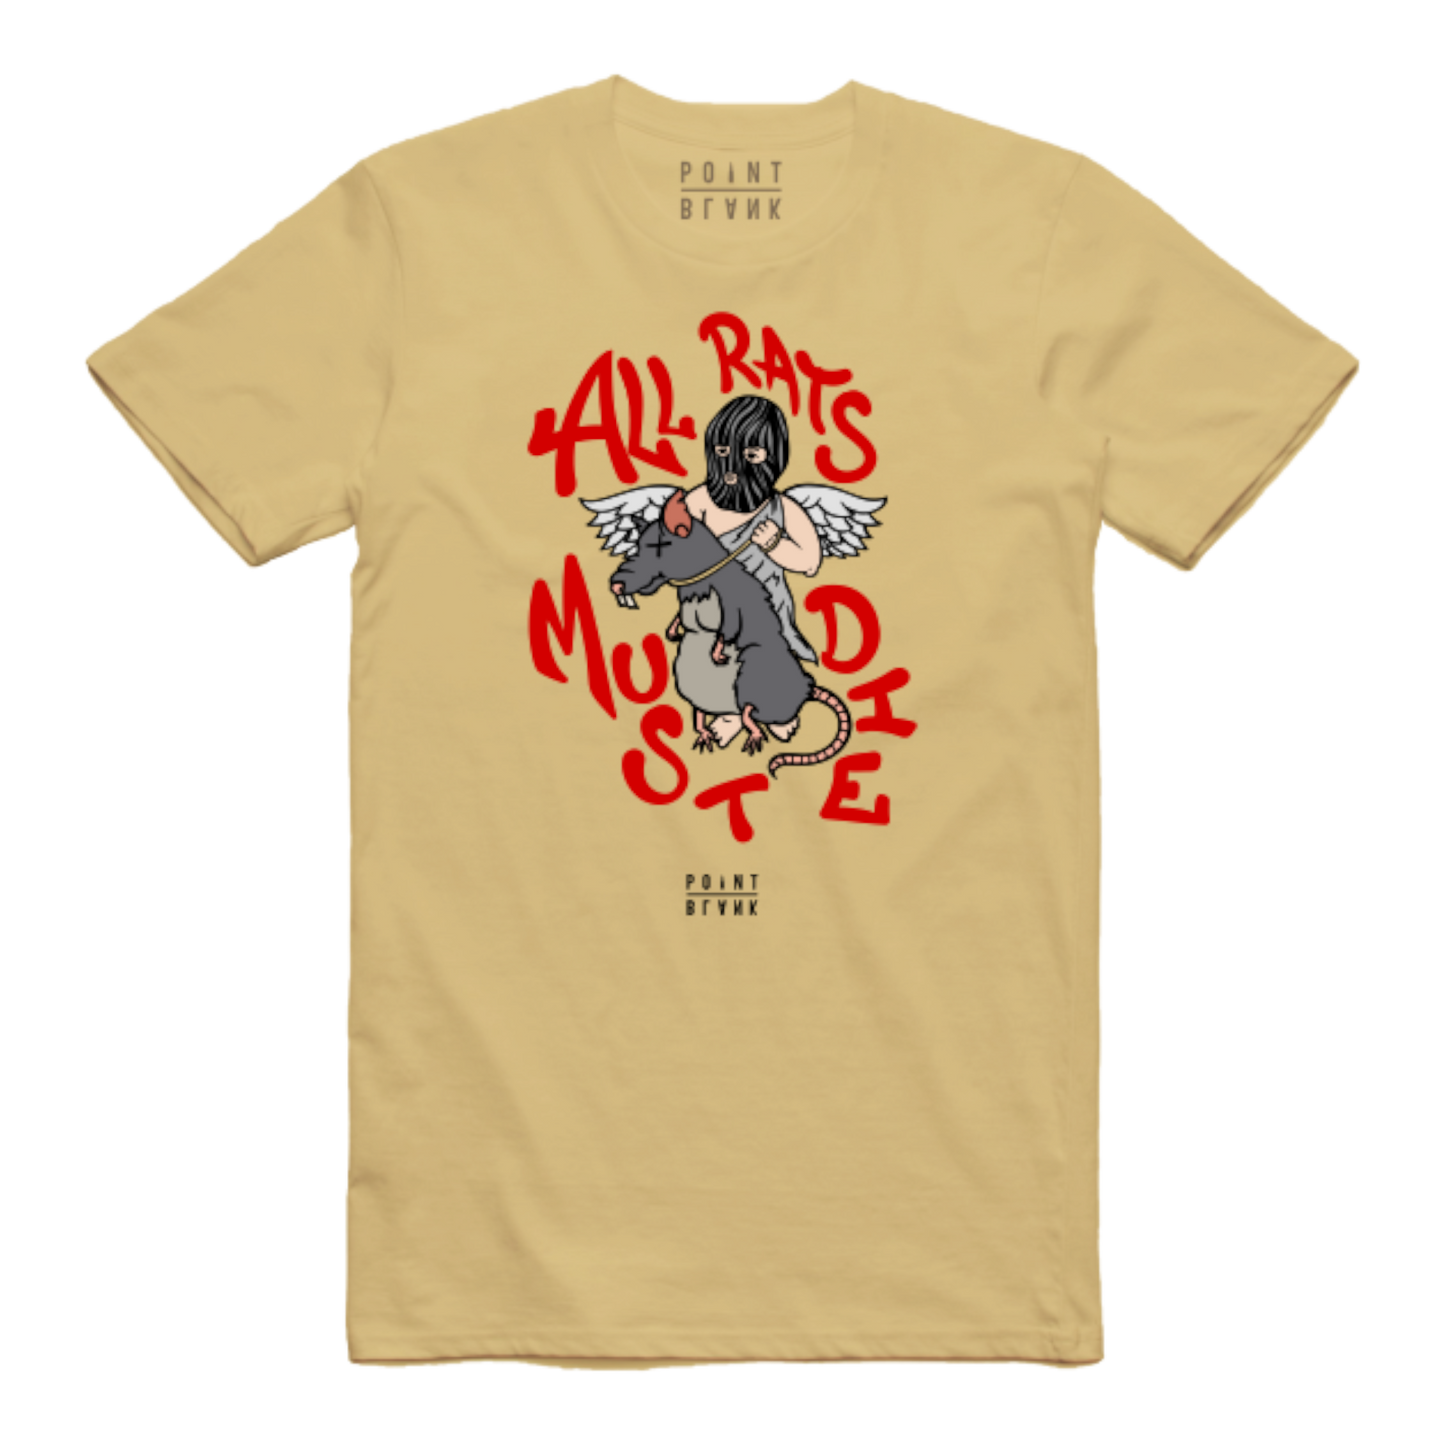 All Rats Must Die T-Shirt (Vintage Gold)